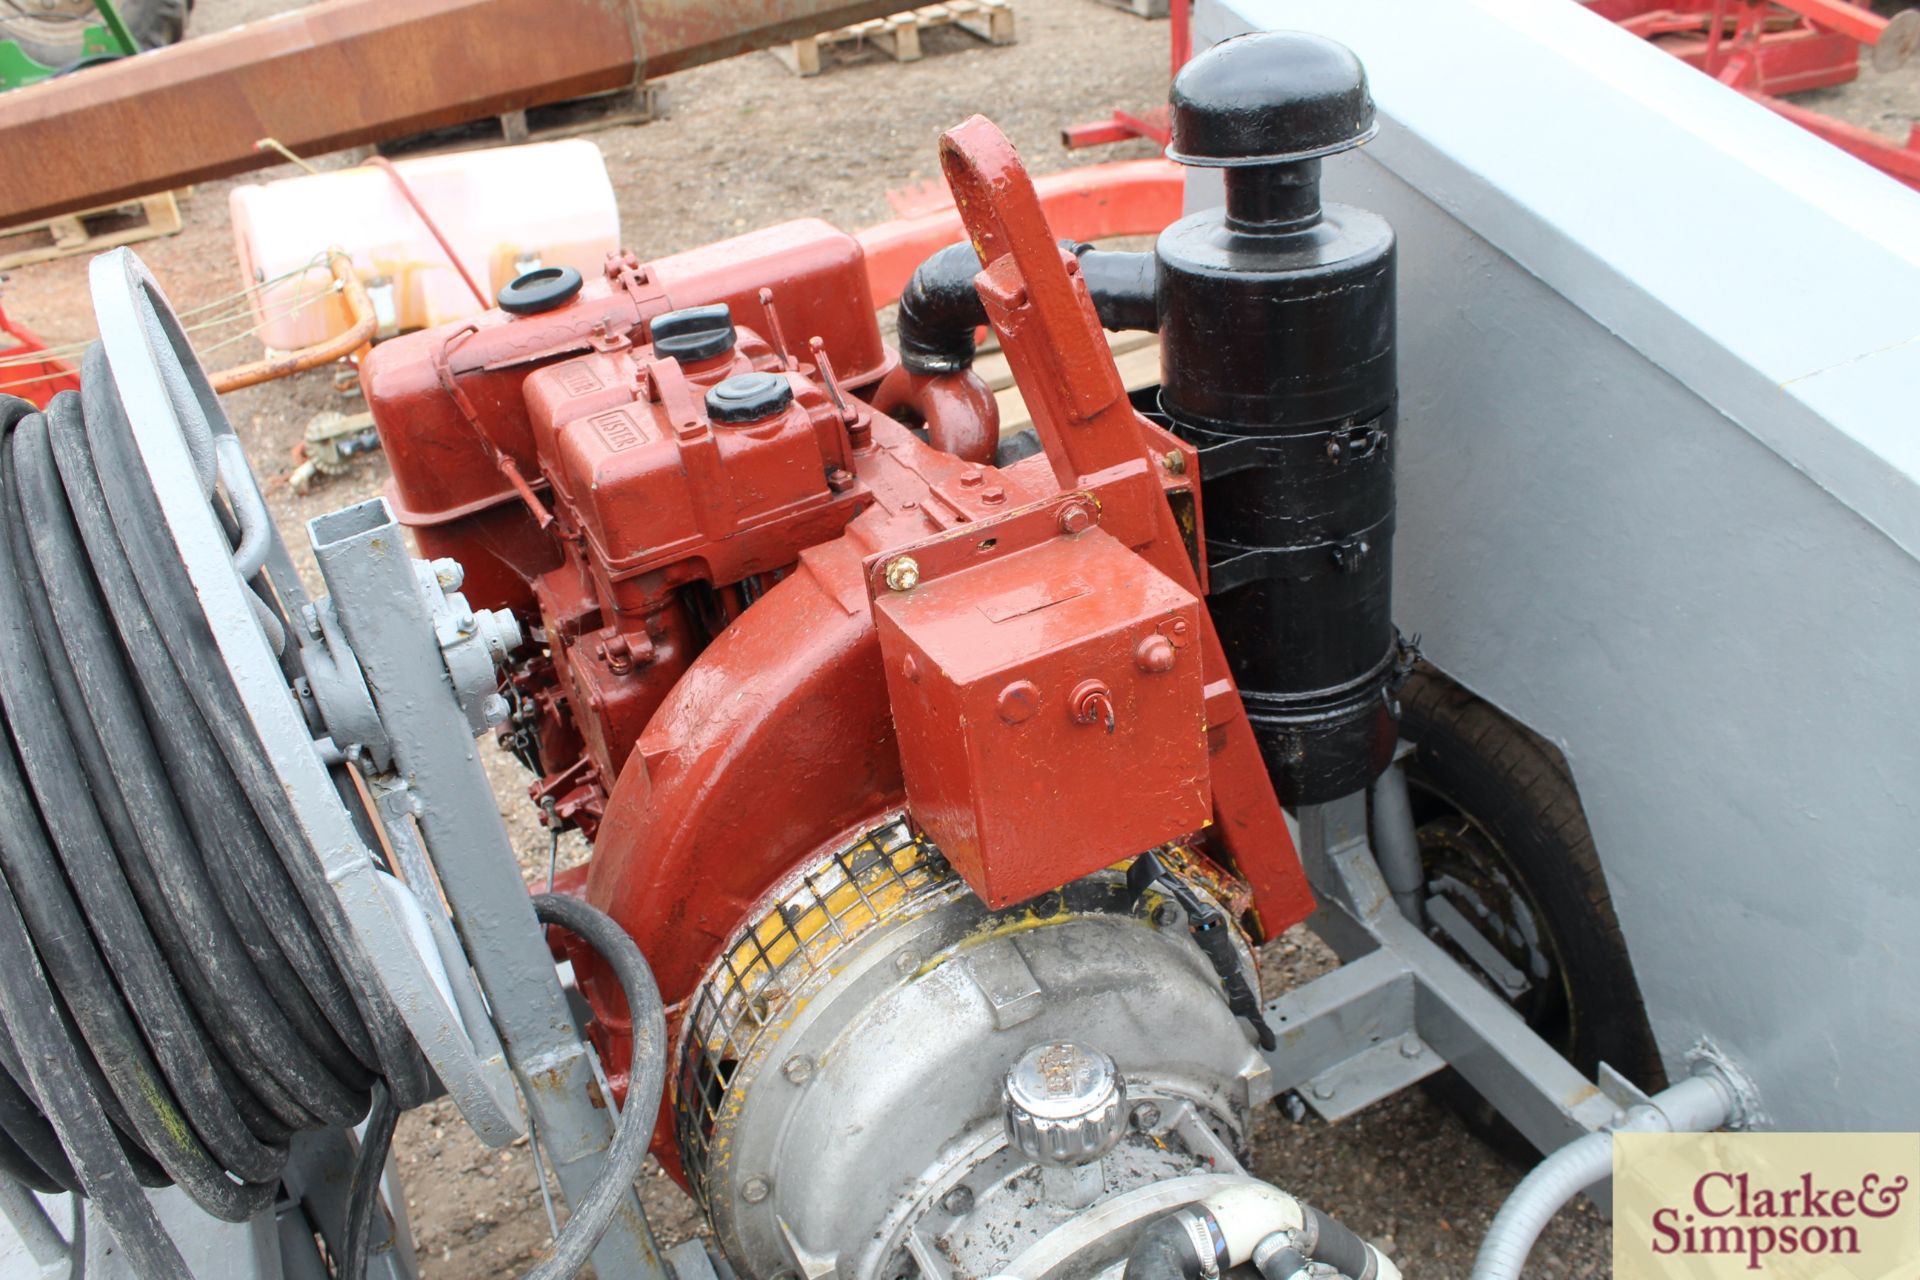 Harben fast tow high pressure drain jetter. With Lister diesel engine. - Image 7 of 8